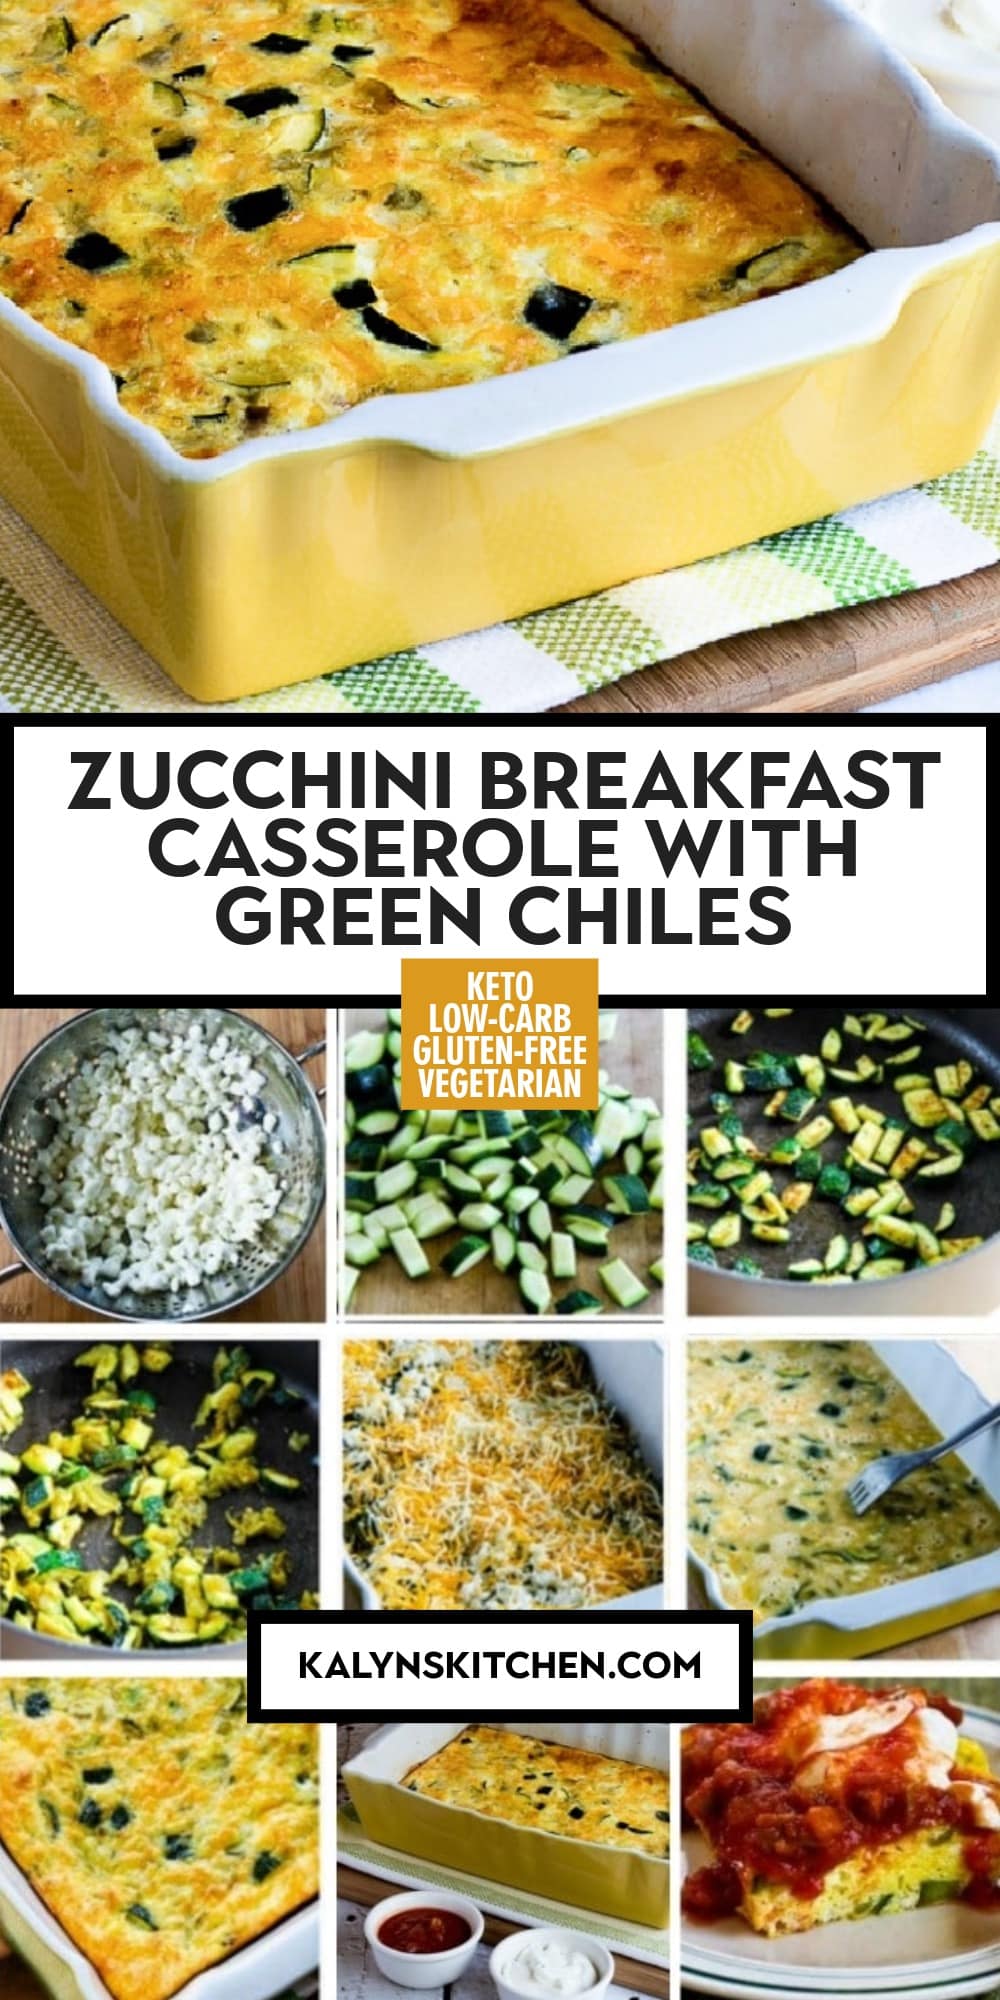 Pinterest image of Zucchini Breakfast Casserole with Green Chiles